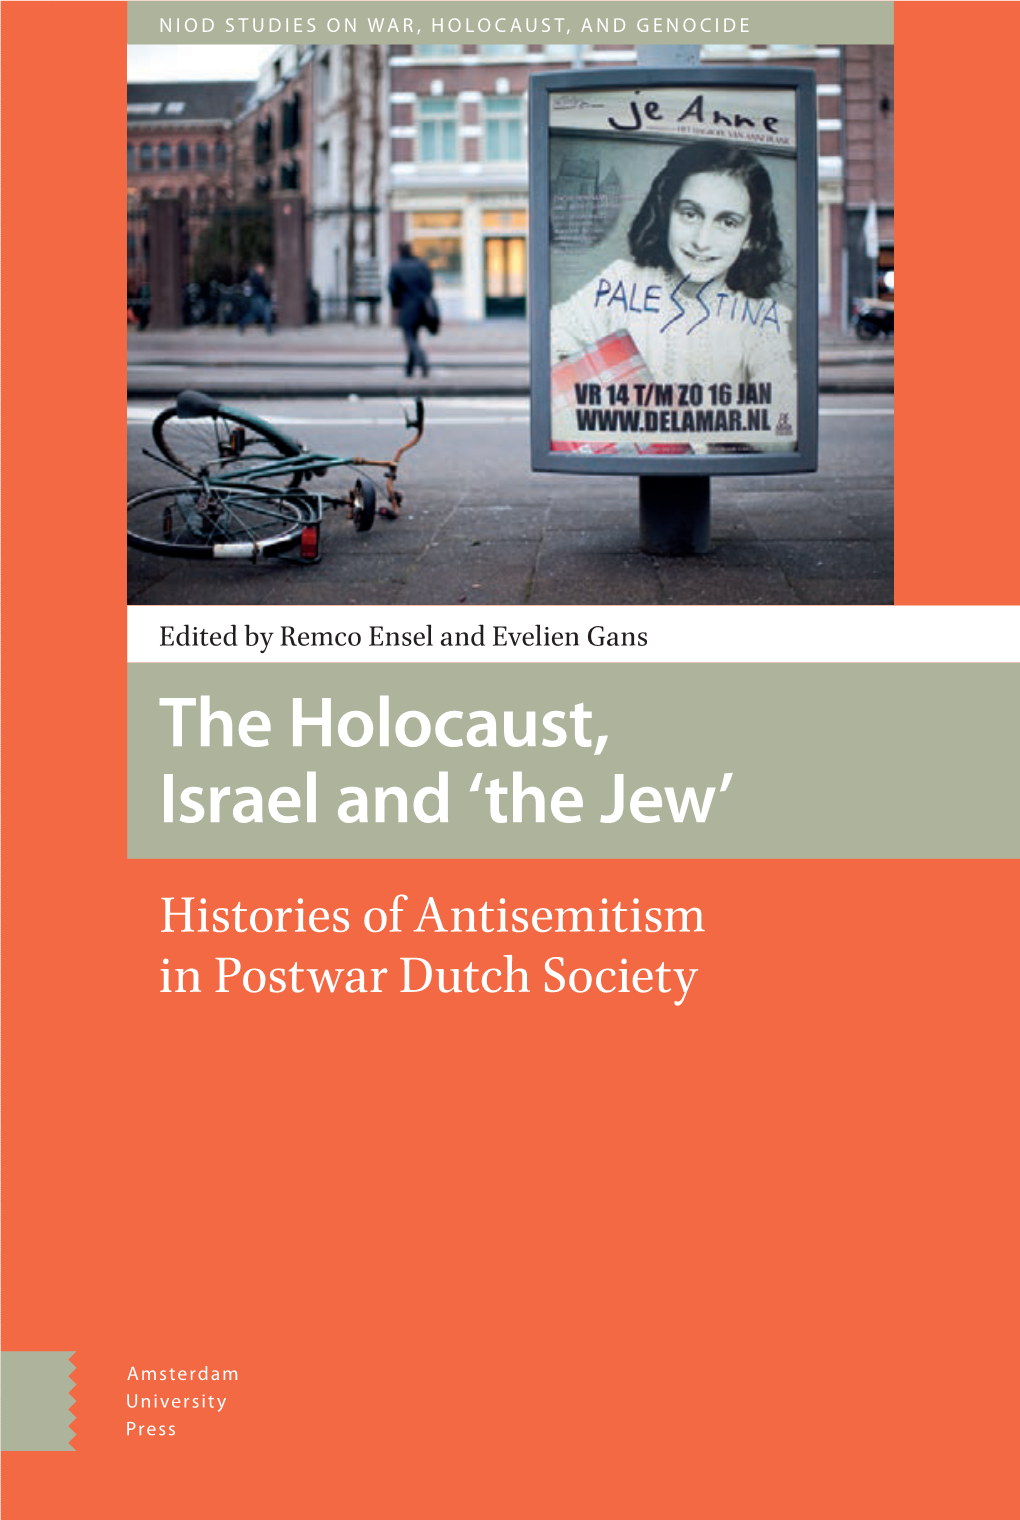 The Holocaust, Israel and 'The Jew'